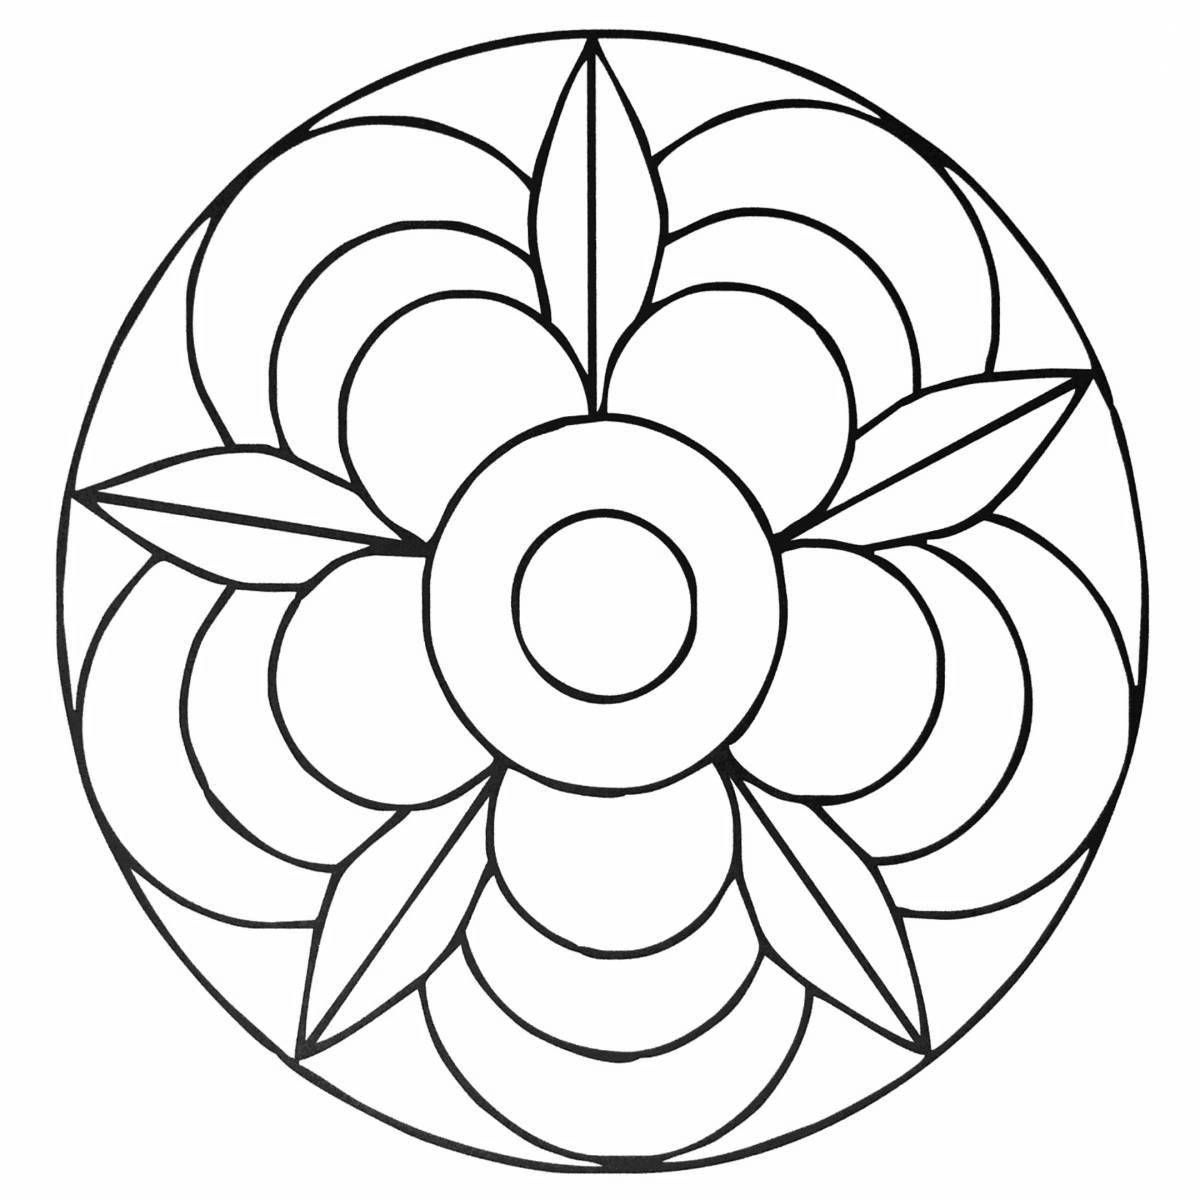 Coloring page with dazzling light pattern